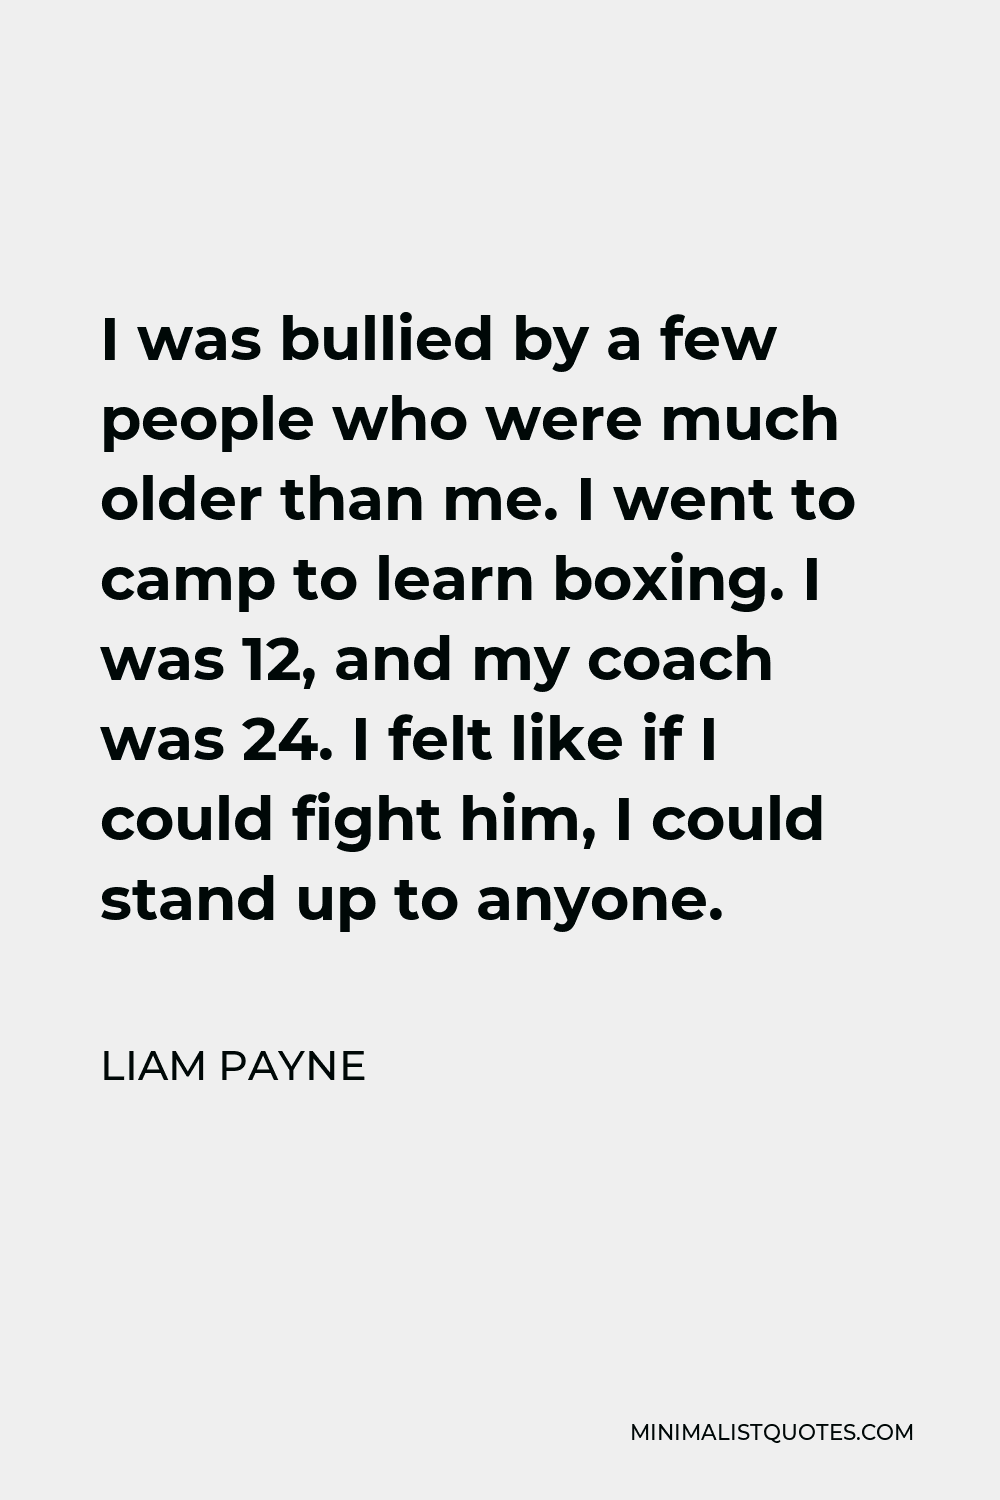 Liam Payne Quote - I was bullied by a few people who were much older than me. I went to camp to learn boxing. I was 12, and my coach was 24. I felt like if I could fight him, I could stand up to anyone.